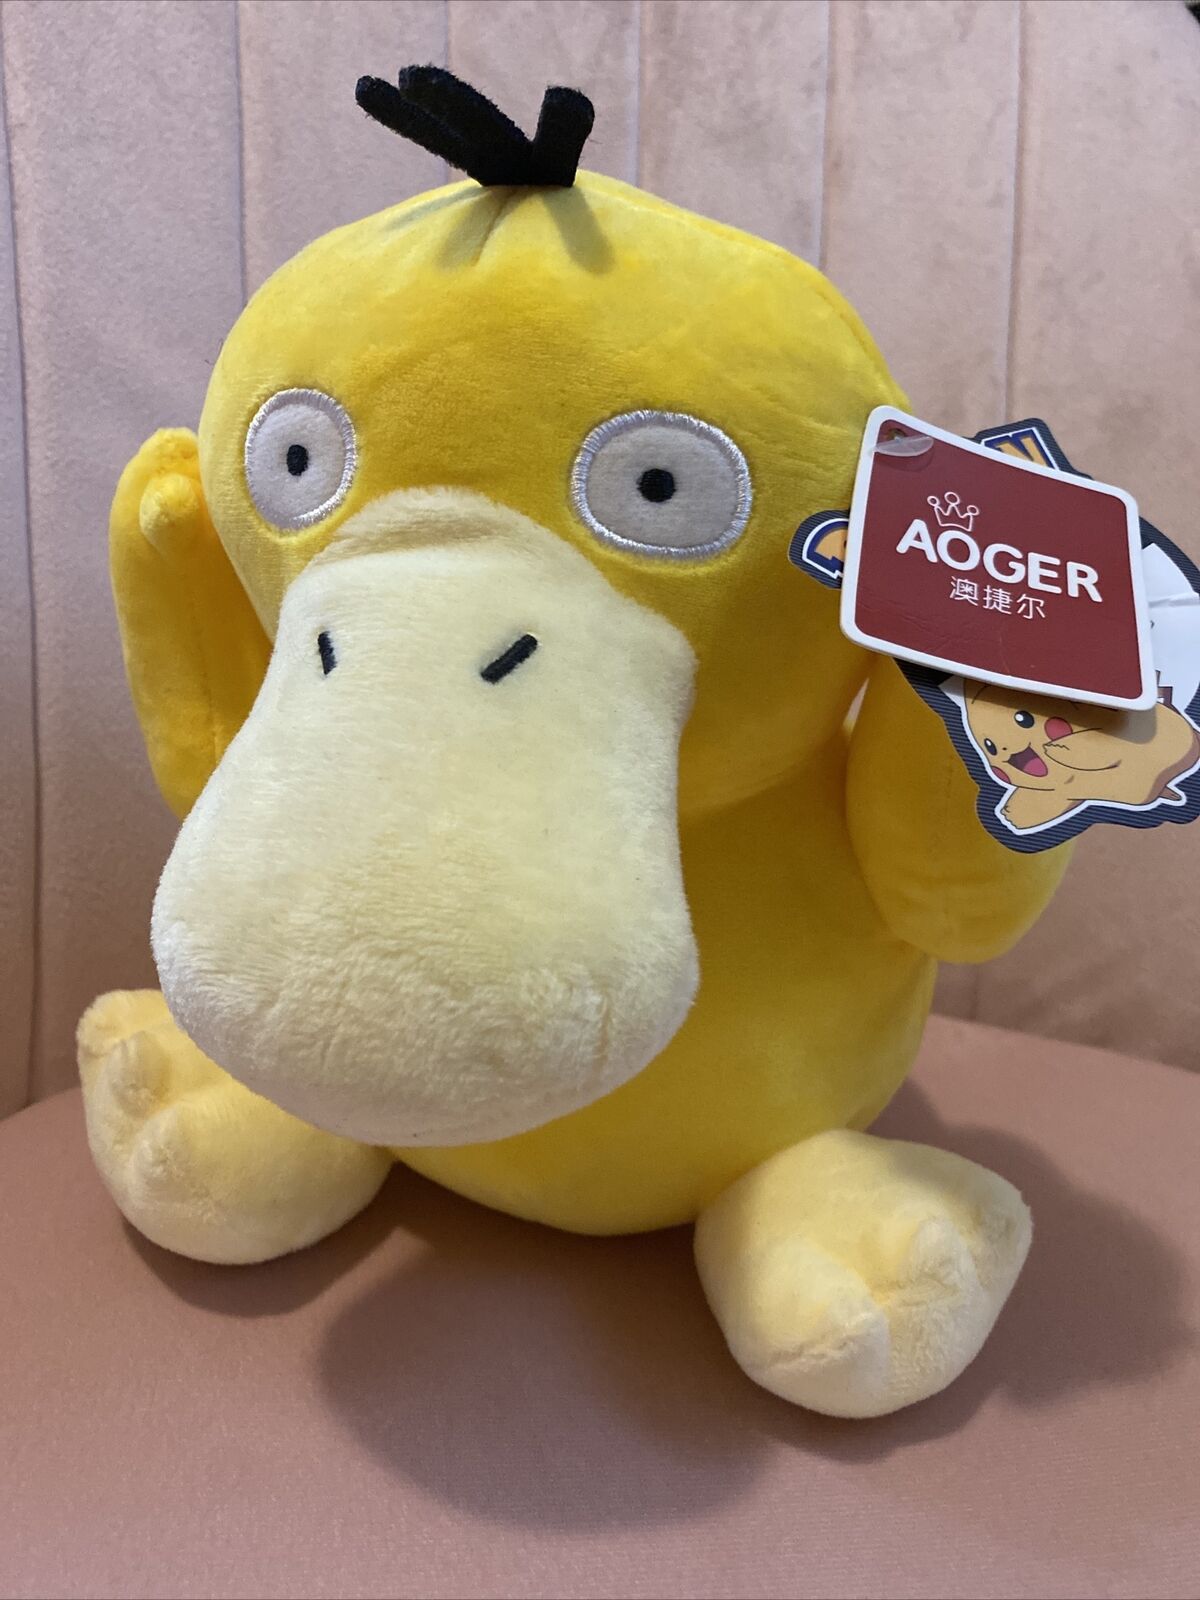 1997 Pokemon Aoger Psyduck Plush Slightly Used With (Bent) Tags 8\